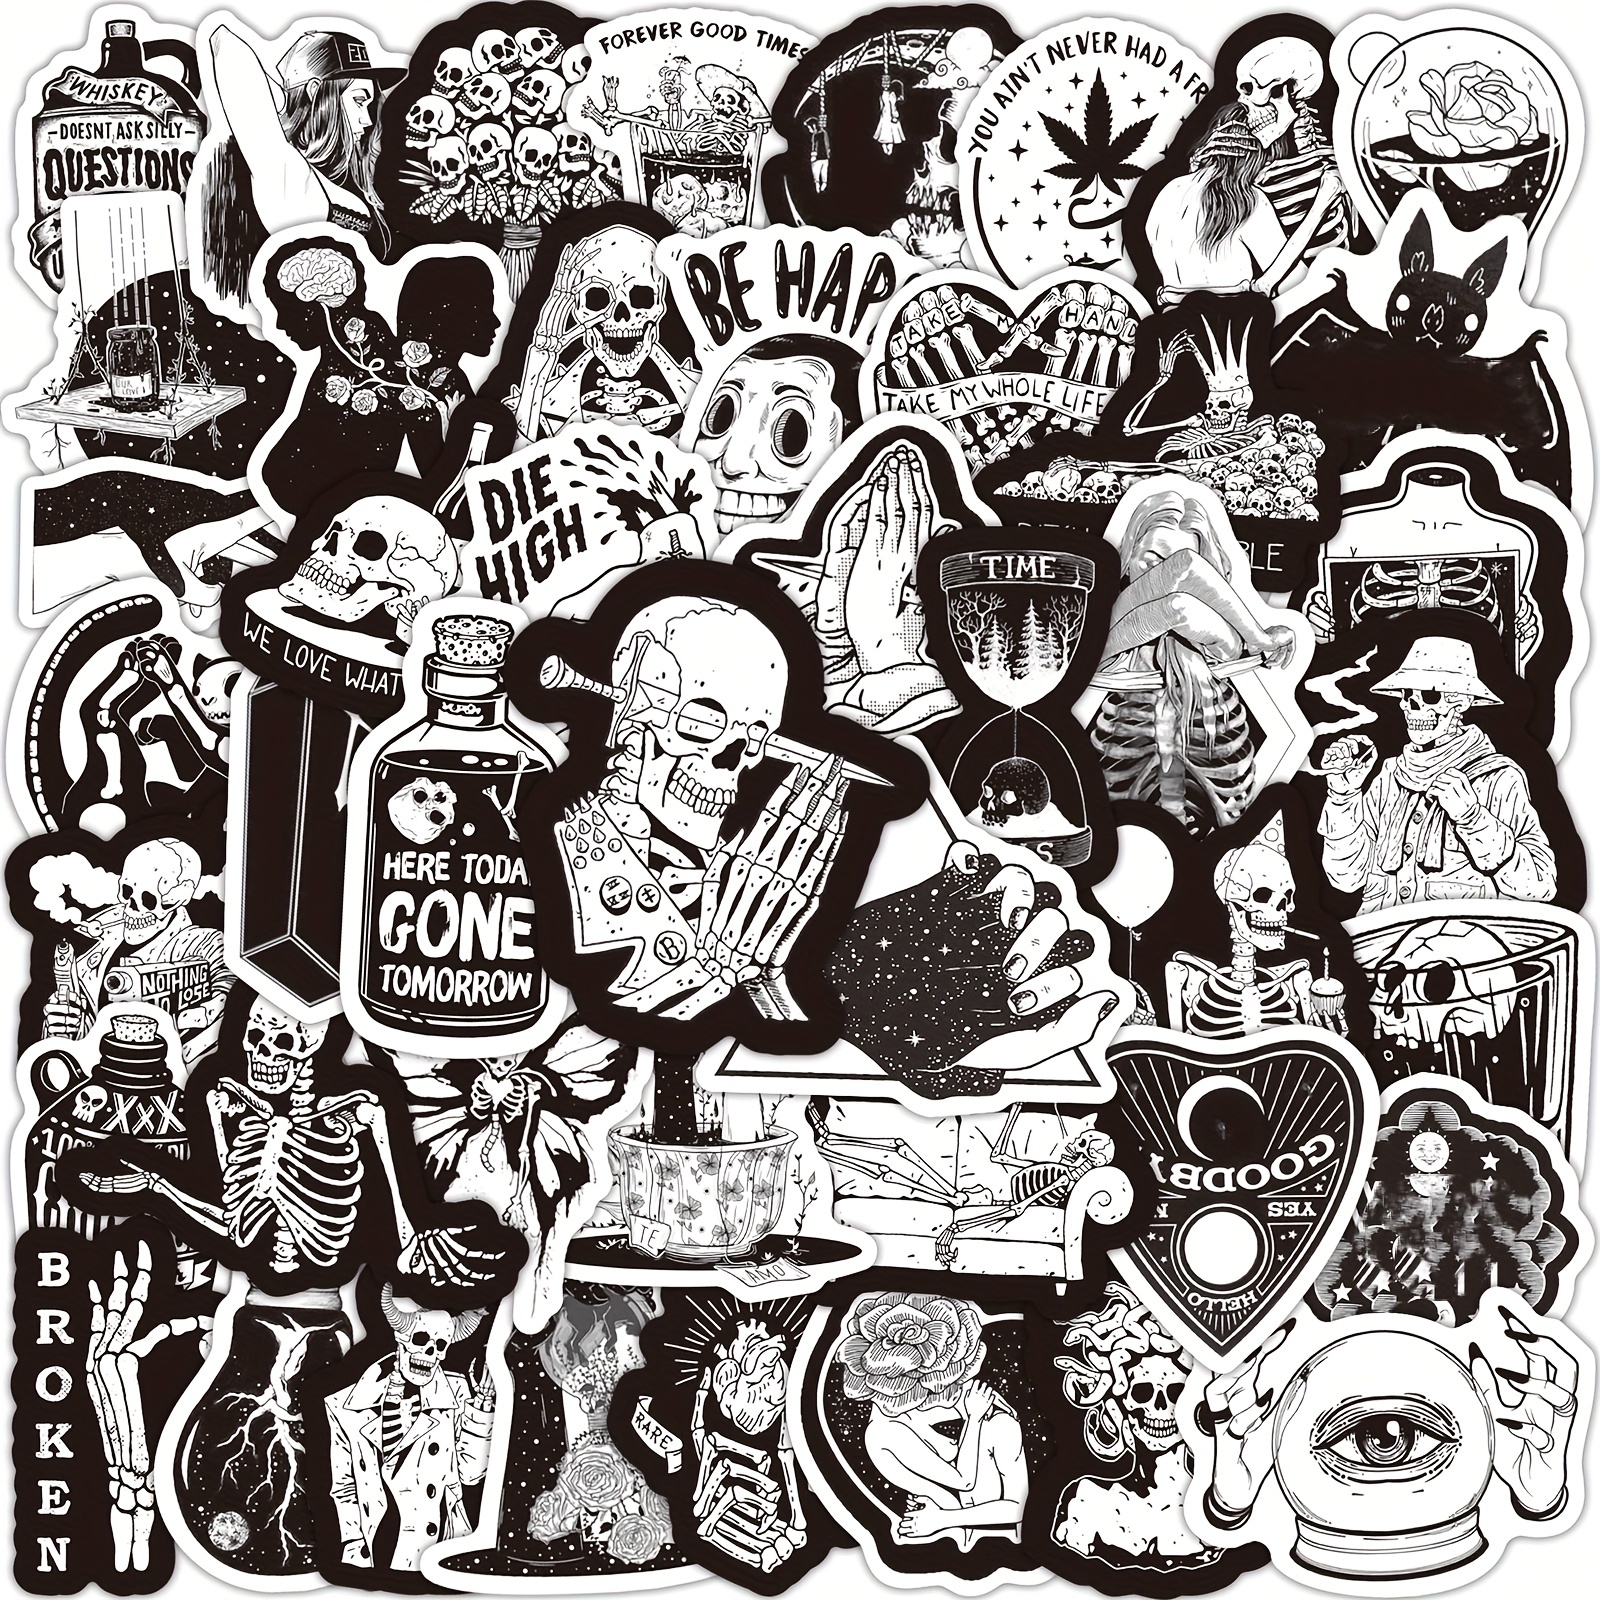 200pcs Cool Gothic Stickers Pack For Teens, Vinyl Punk Gothic